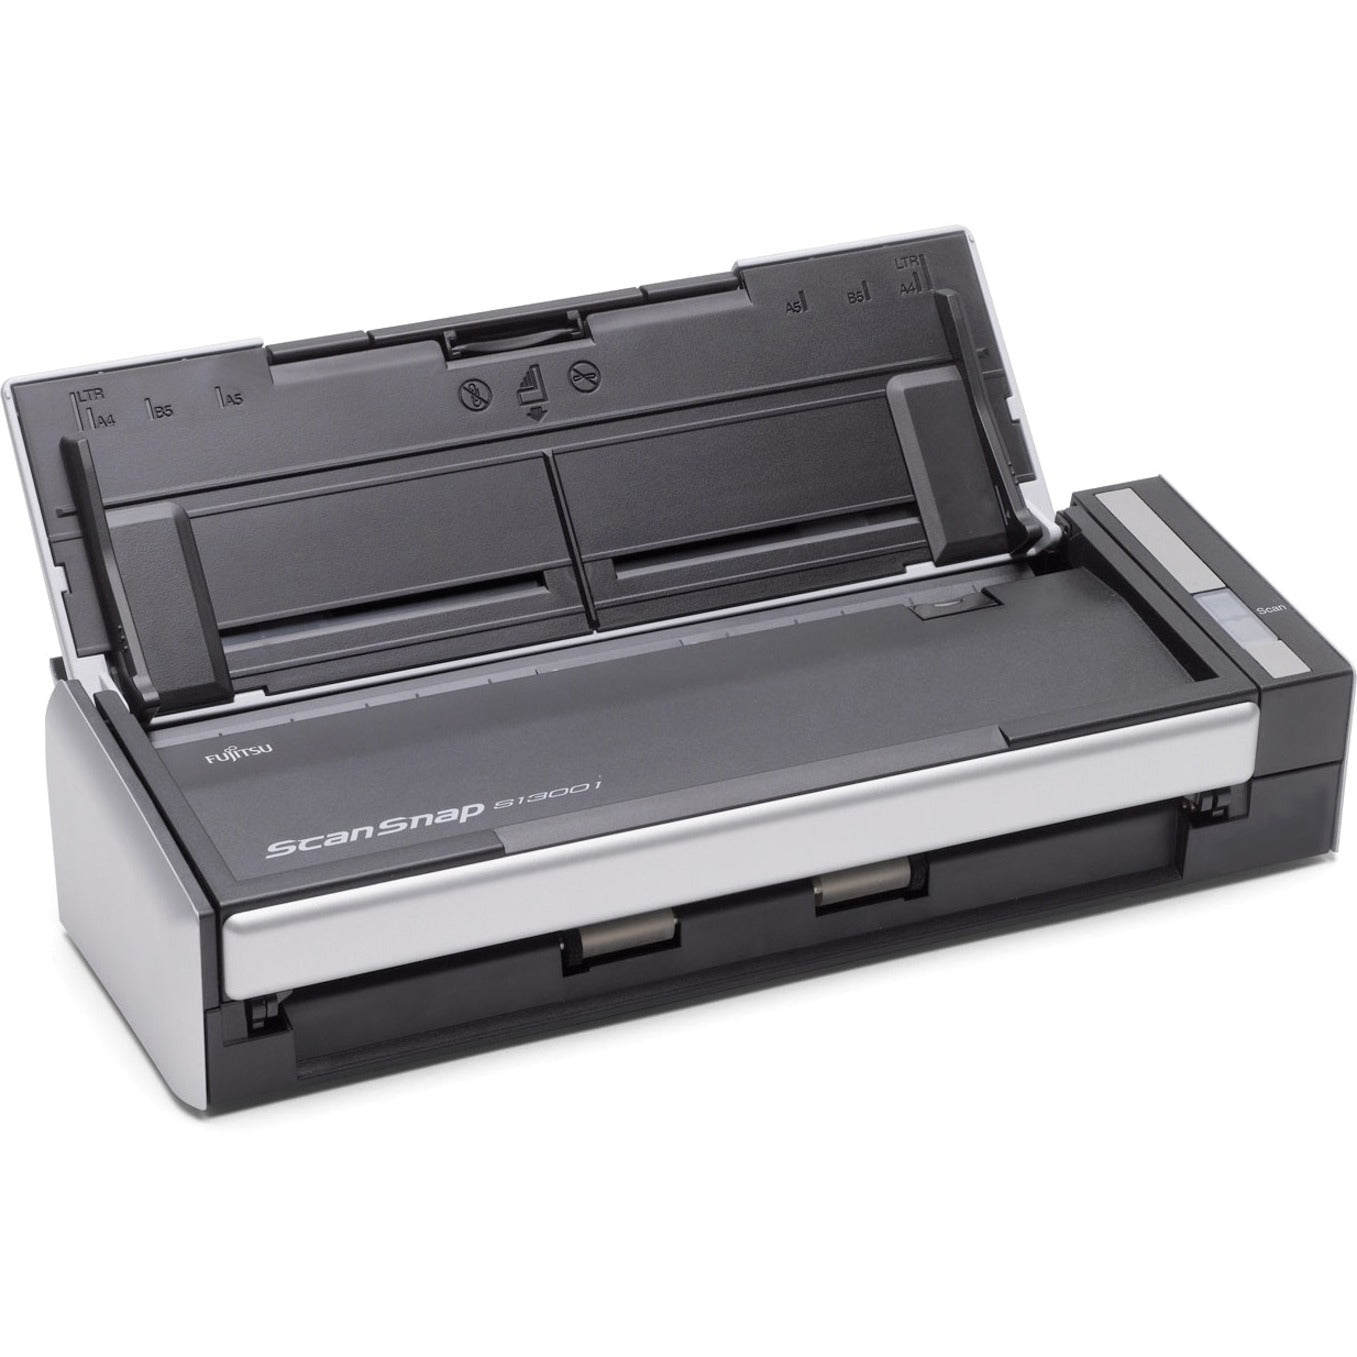 Fujitsu PA03643-B005 ScanSnap S1300i Portable Color Duplex Scanner for PC and Mac, Compact and Efficient Scanning Solution